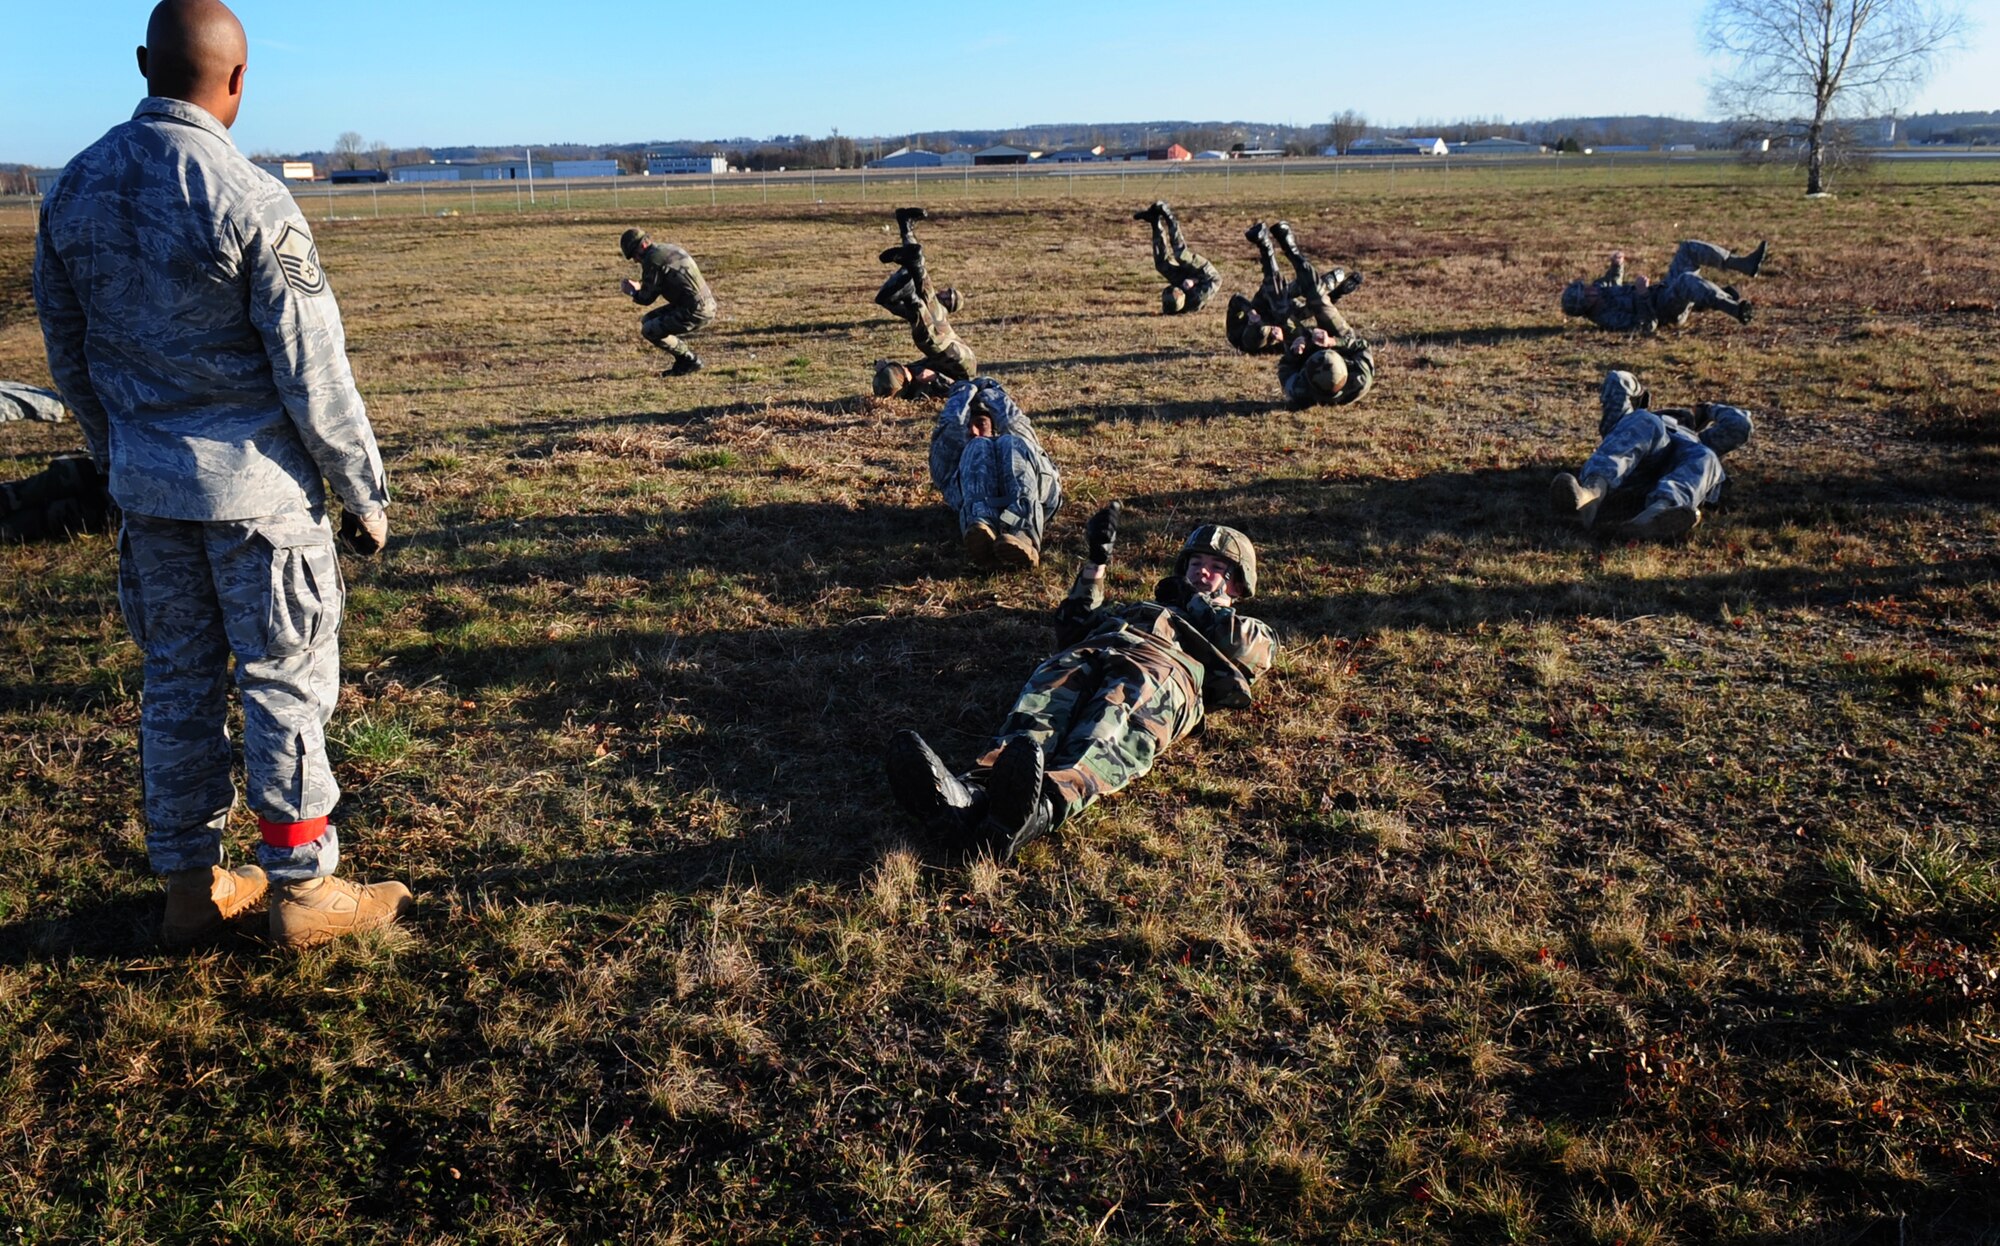 U.S. Air Force Master Sgt. James Turner with the 435 Security Forces Squadron, conducts training with U.S. and French military members on the proper form for landing from a parachute jump on March 2, 2010. Members of the 435th Contingency Response Group and the 5th Quartermaster Company joined with their French military counterparts for a week of training at the École des troupes aéroportées (ETAP), or School of Airborne Troops, a military school dedicated to training the military paratroopers   of the French army, located in the town of Pau, in the département of Pyrénées-Atlantiques, France.  The ETAP is responsible for training paratroopers, and for international cooperation and promotion of paratroop culture. (U.S. Air Force Photo by Staff Sgt. Jocelyn Rich) 